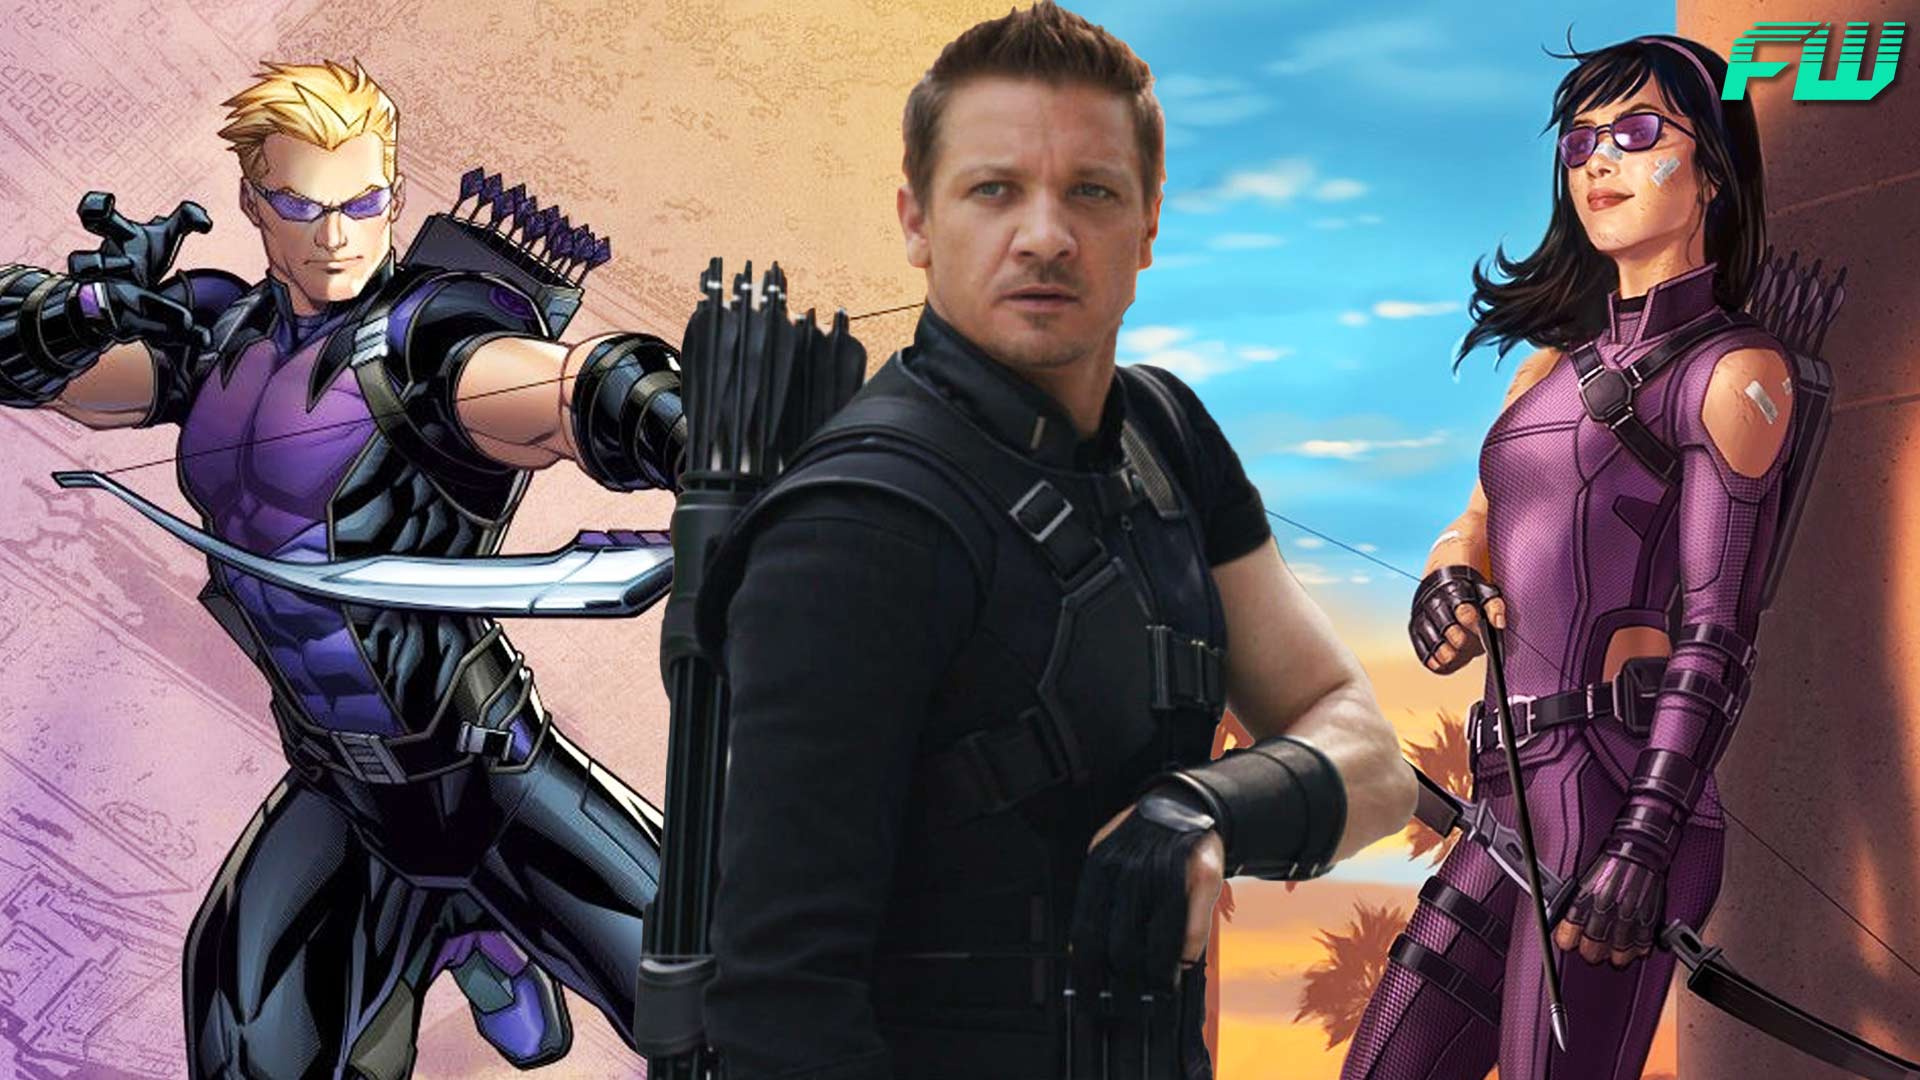 What is your review of Hawkeye (Disney+ series)? - Quora